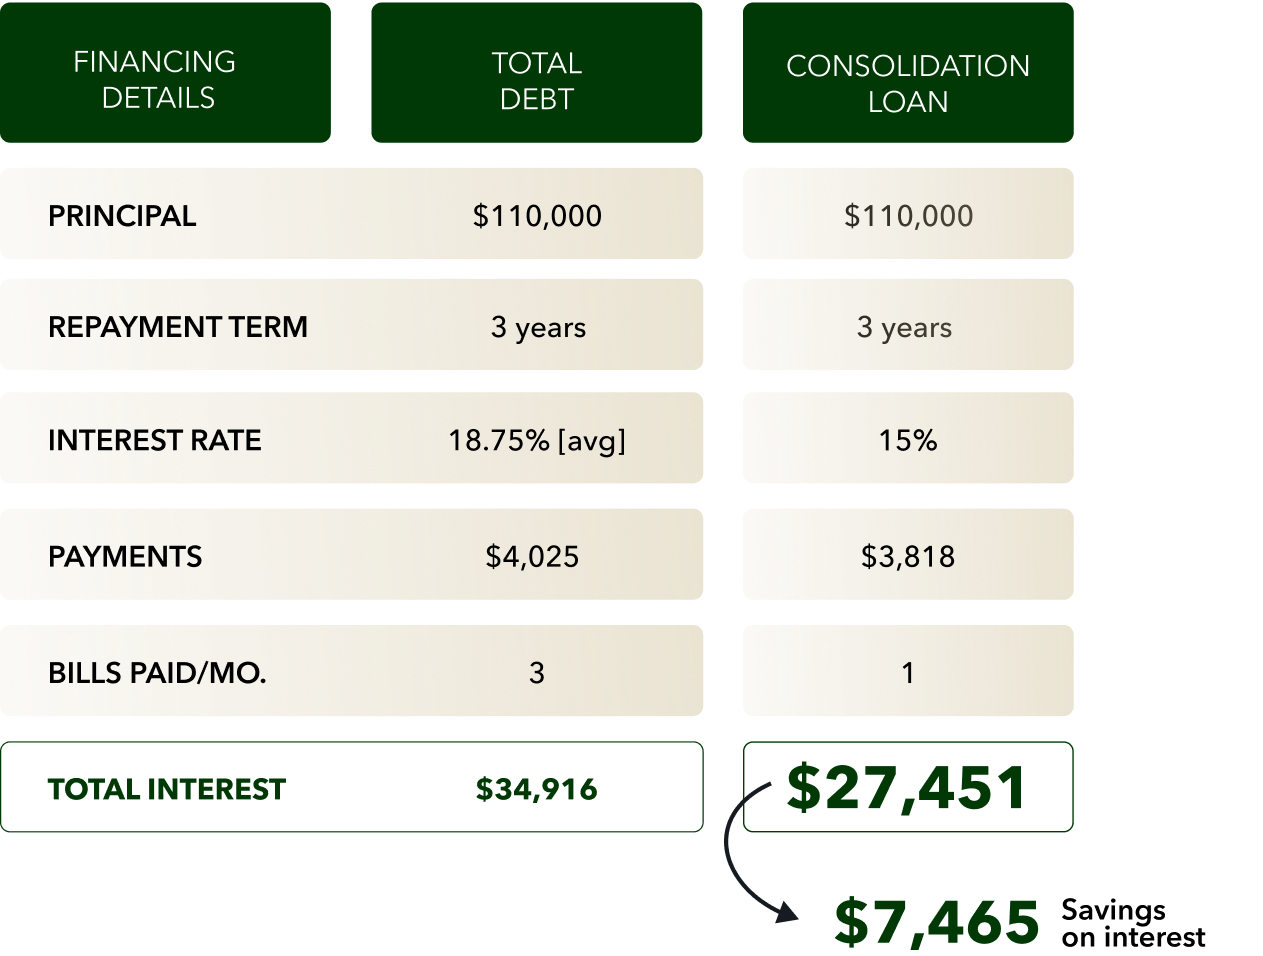 Save roughly $7,465 on interest when you use a debt consolidation loan off of a $110,000 loan